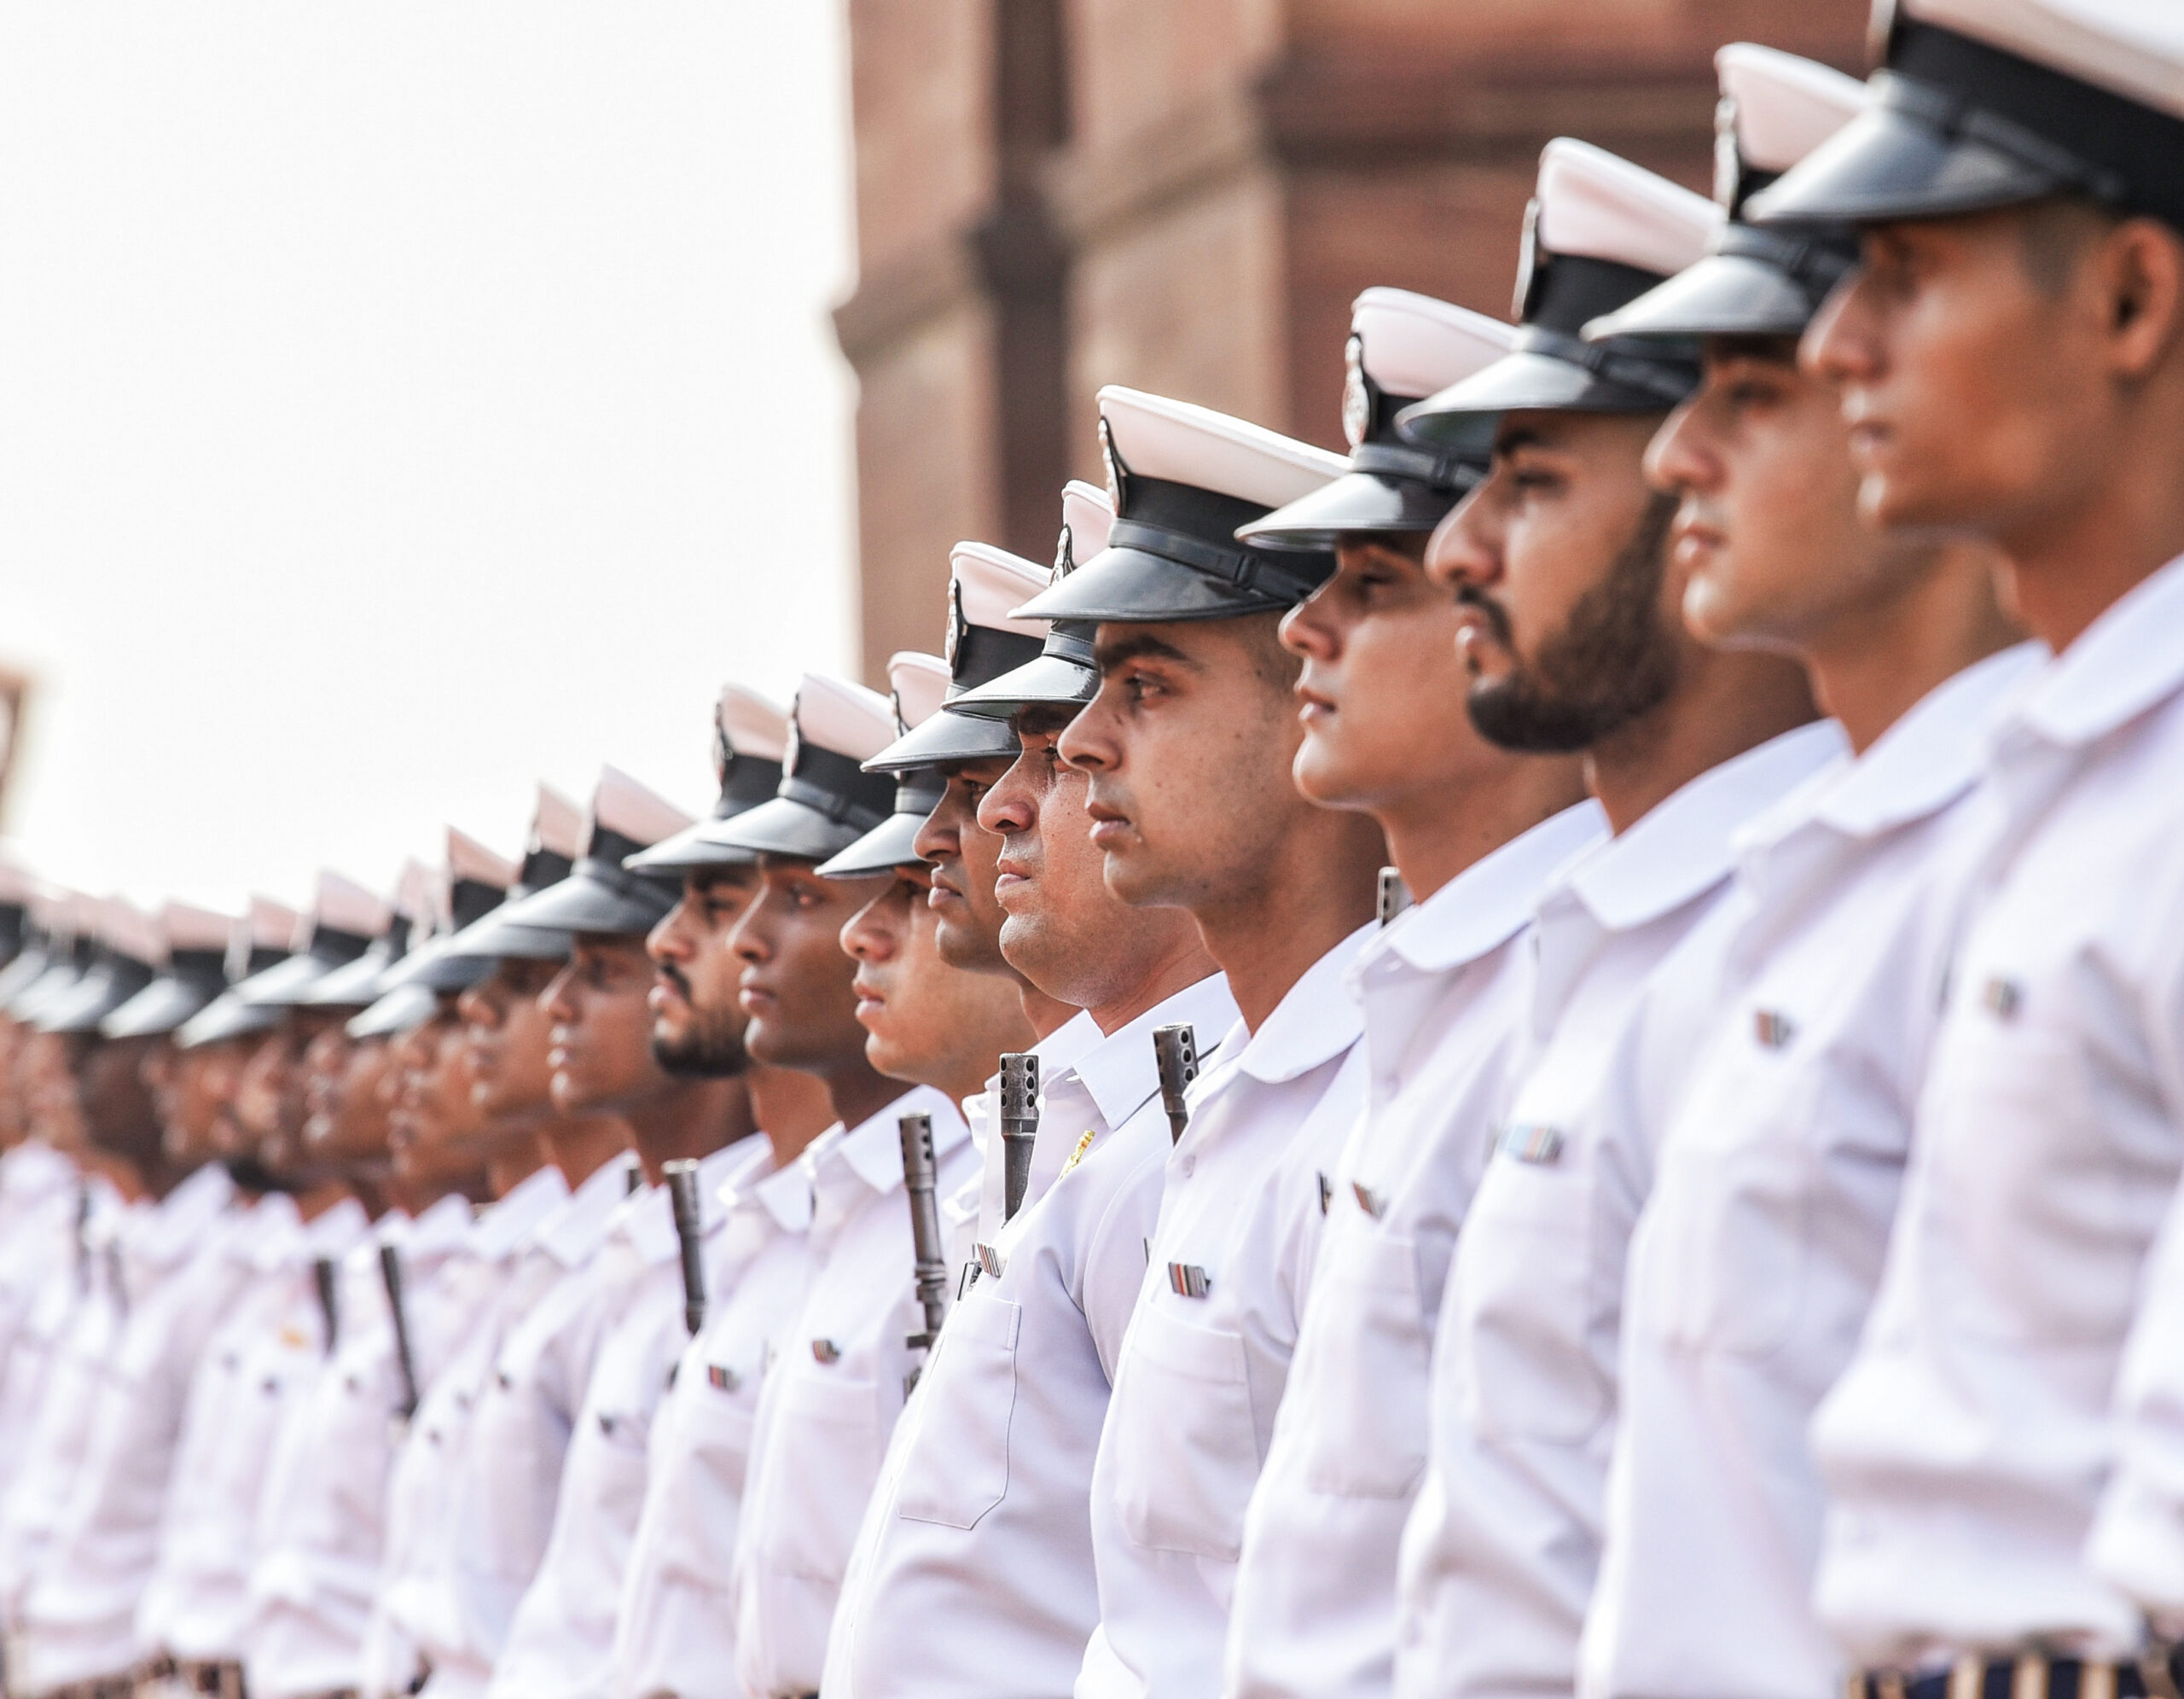 Navy Day 2023 to be celebrated at Sindhudurg Fort, built by Shivaji in 17th century